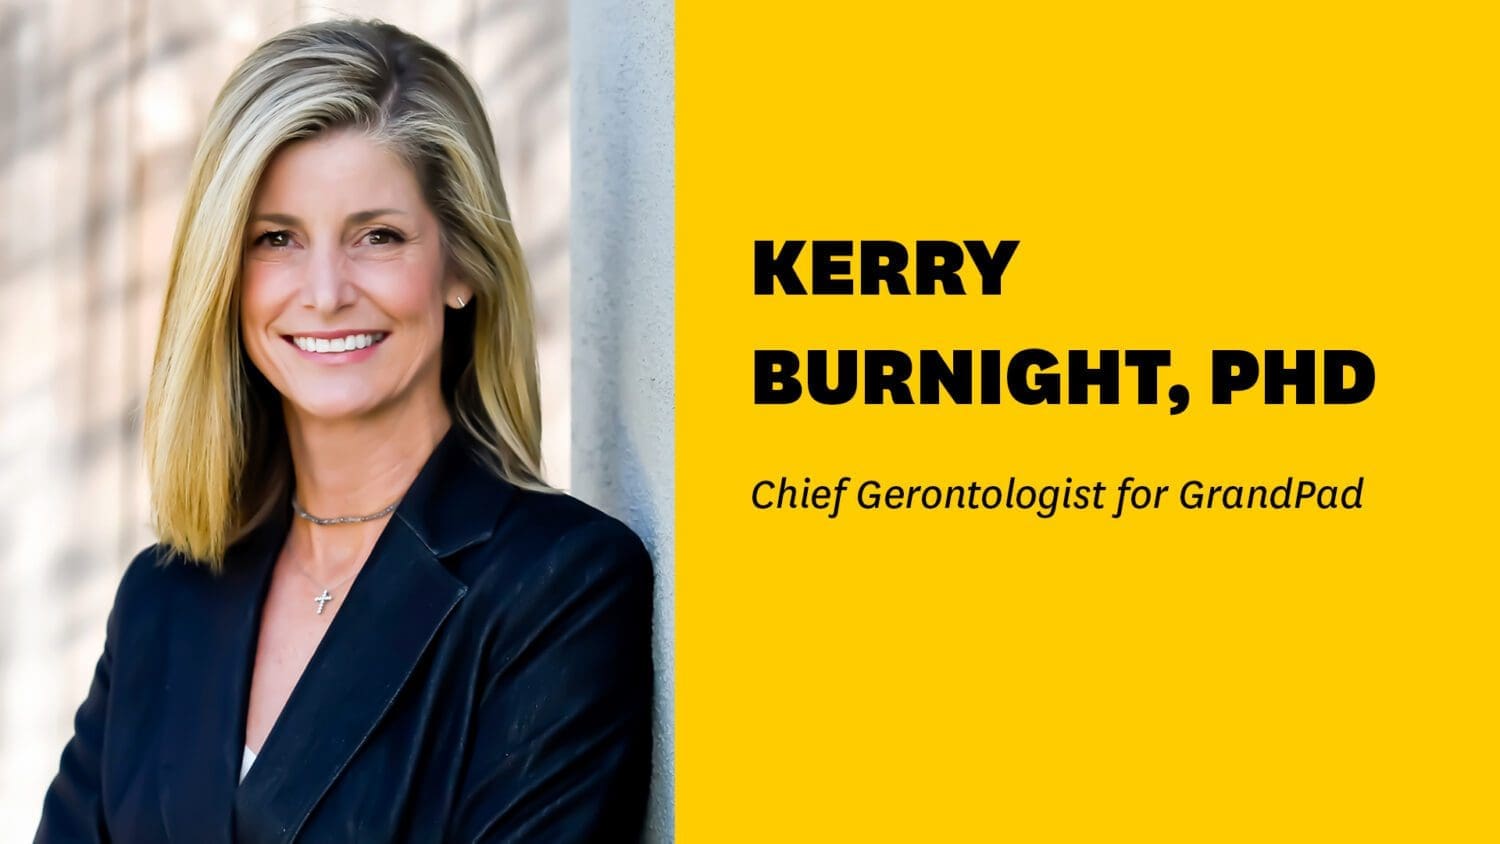 Headshot of Kerry Burnight with name and title